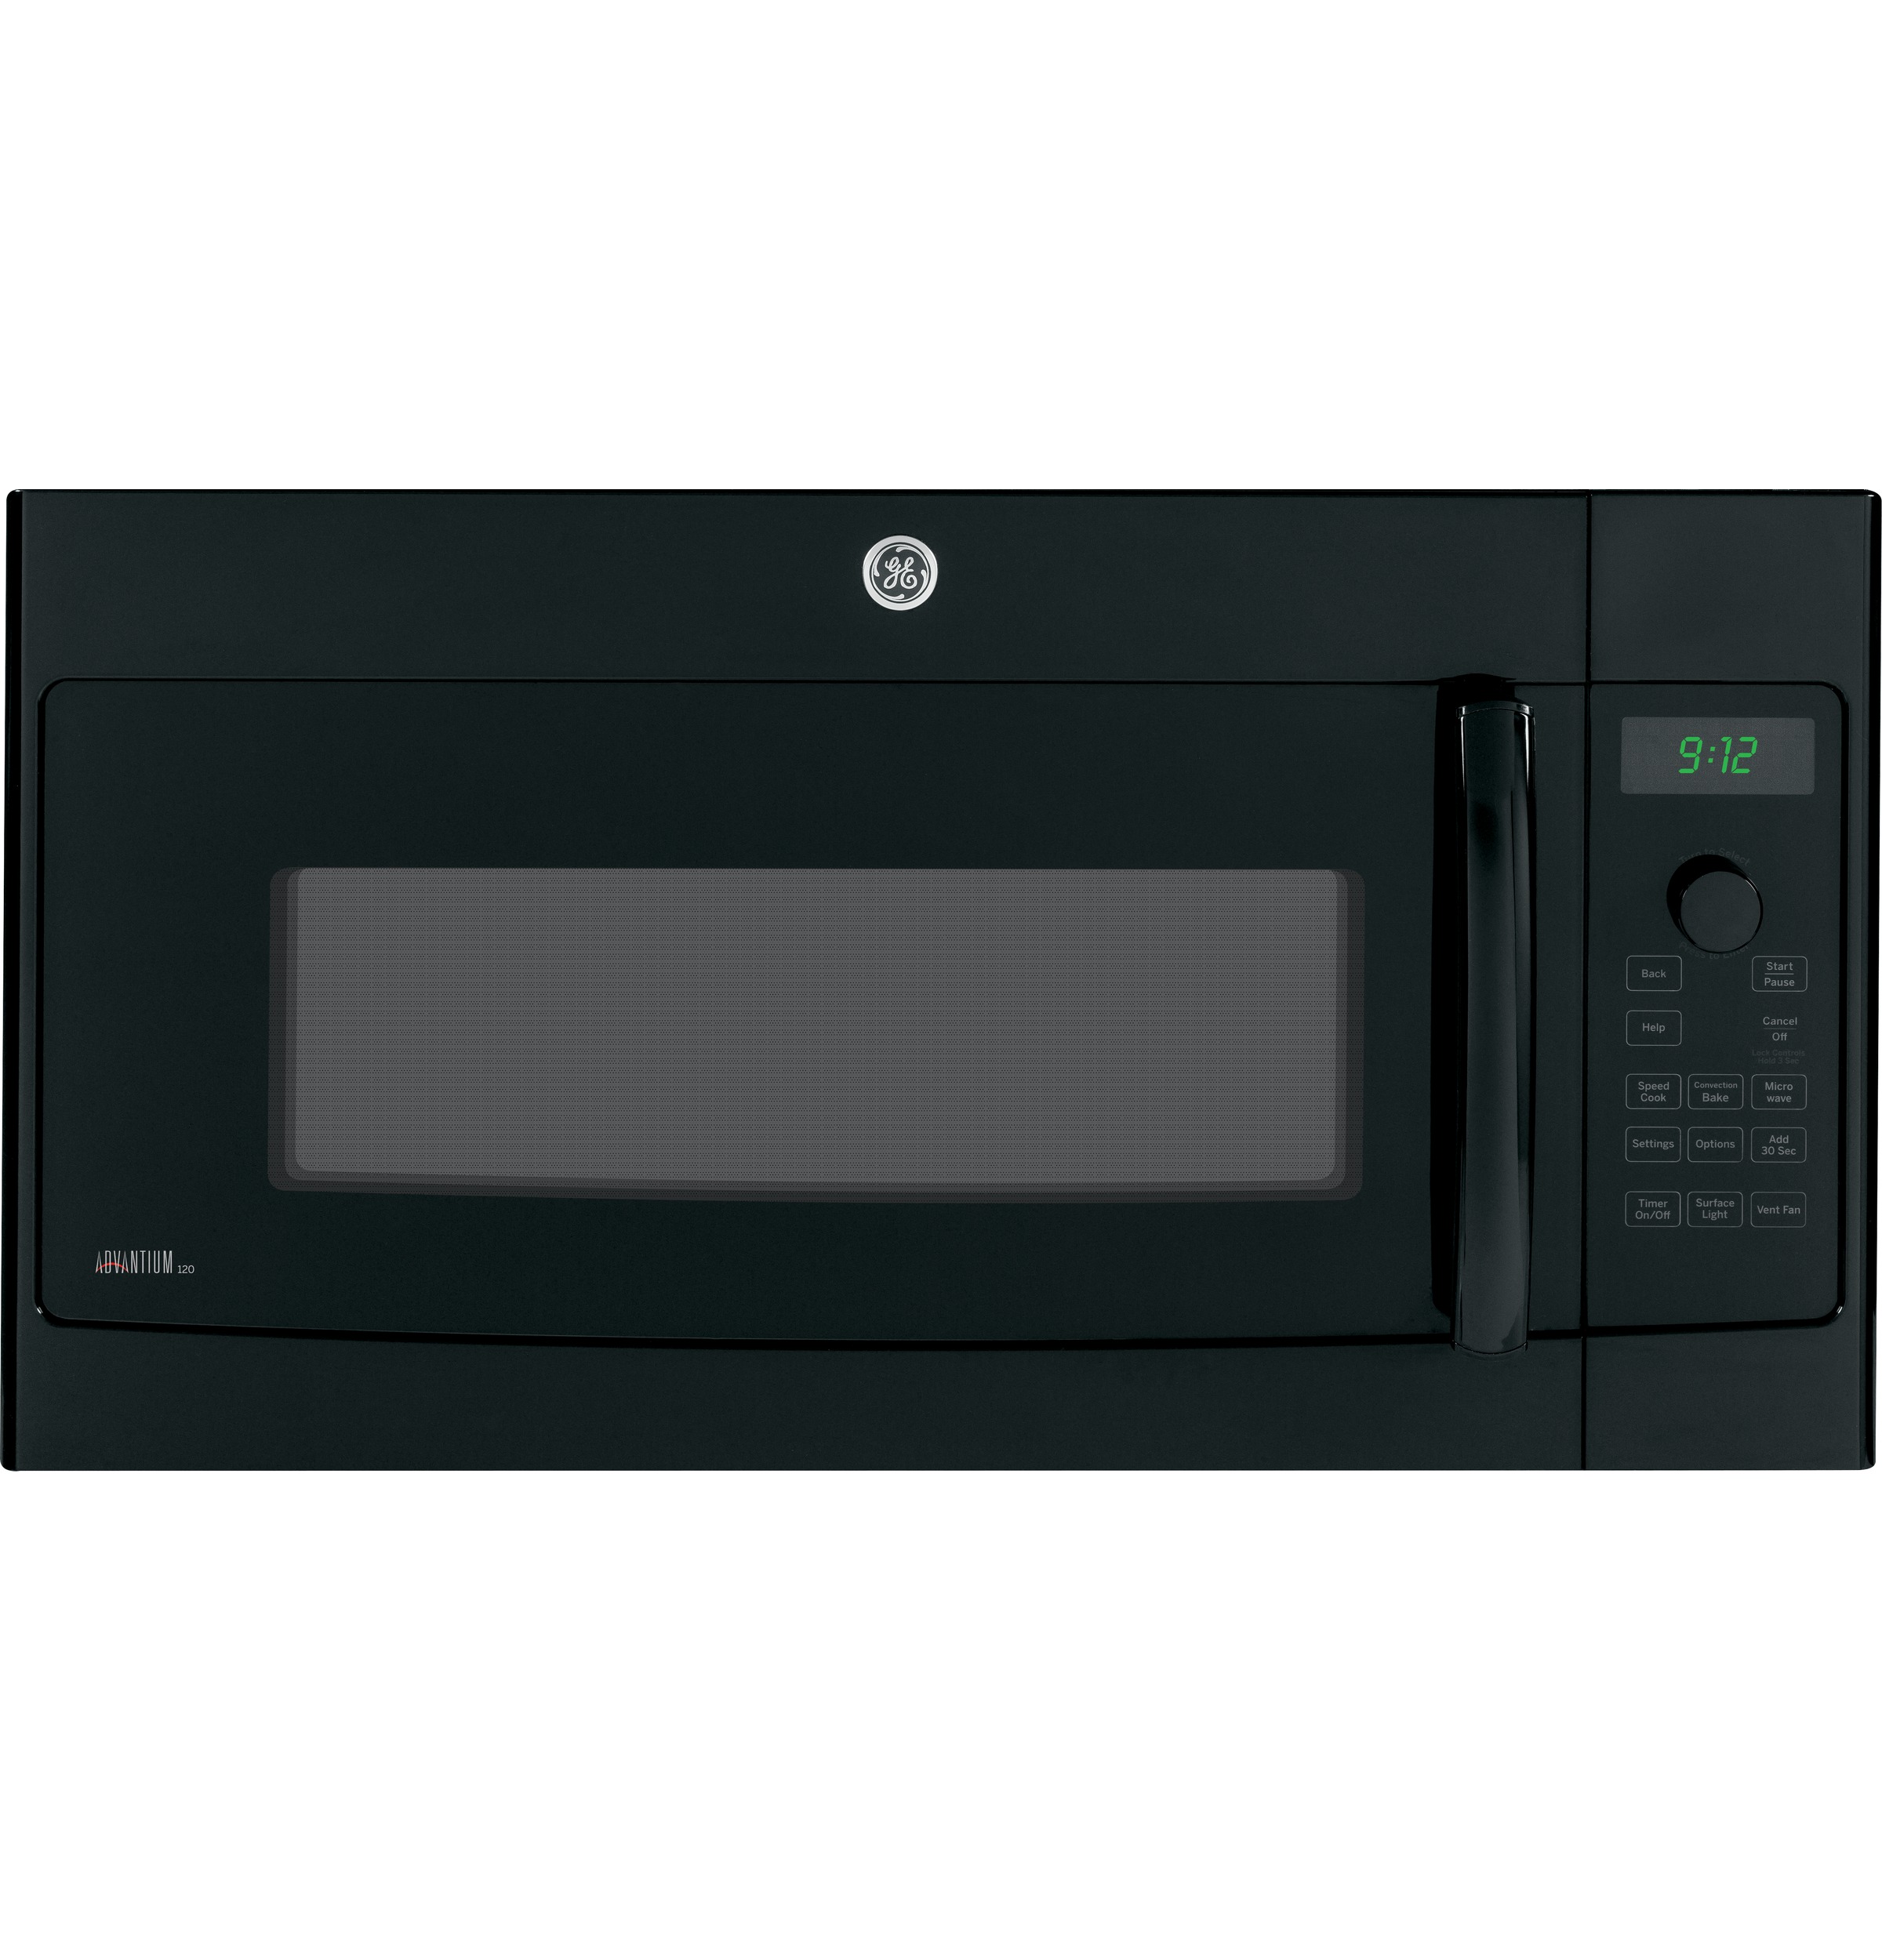 GE Profile Series Over-the-Range Oven with Advantium® Technology